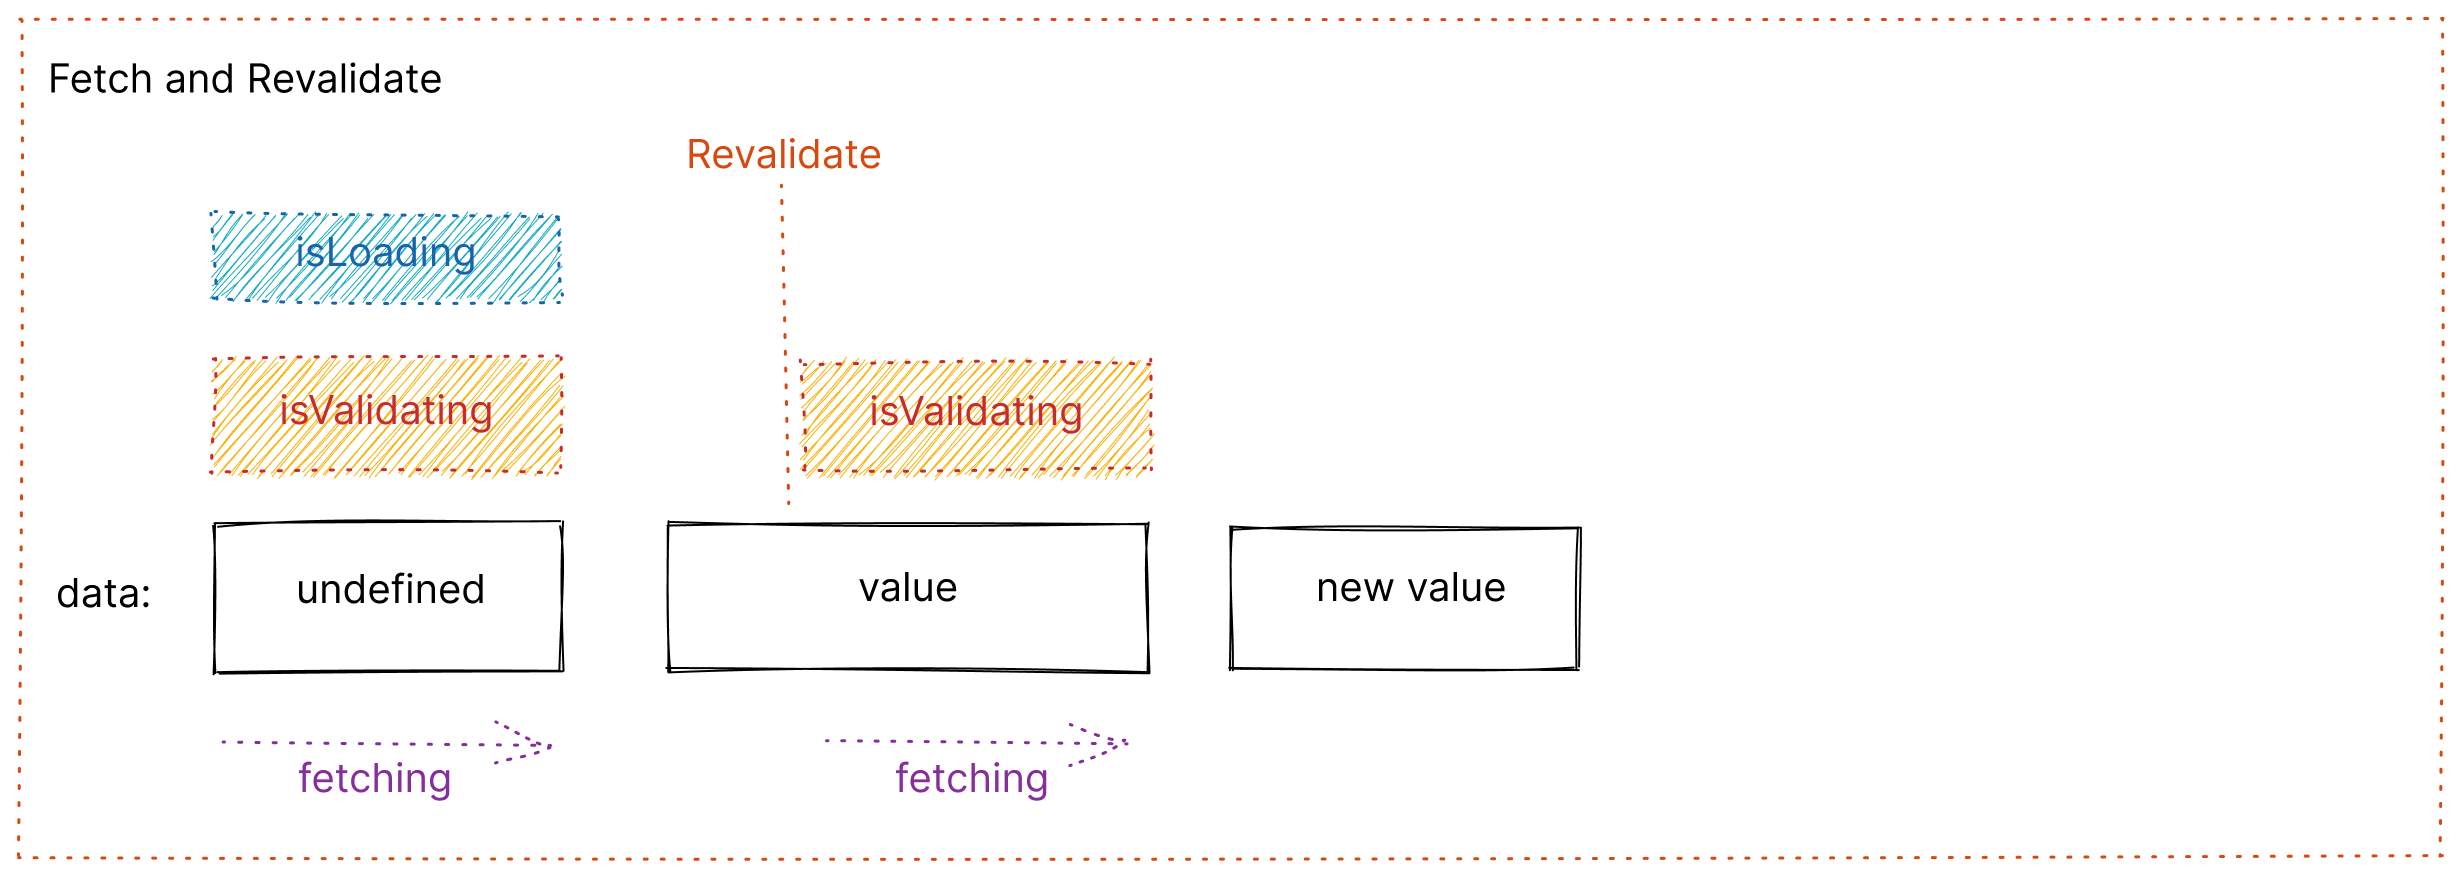 A diagram for the "Fetch and Revalidate" pattern in SWR